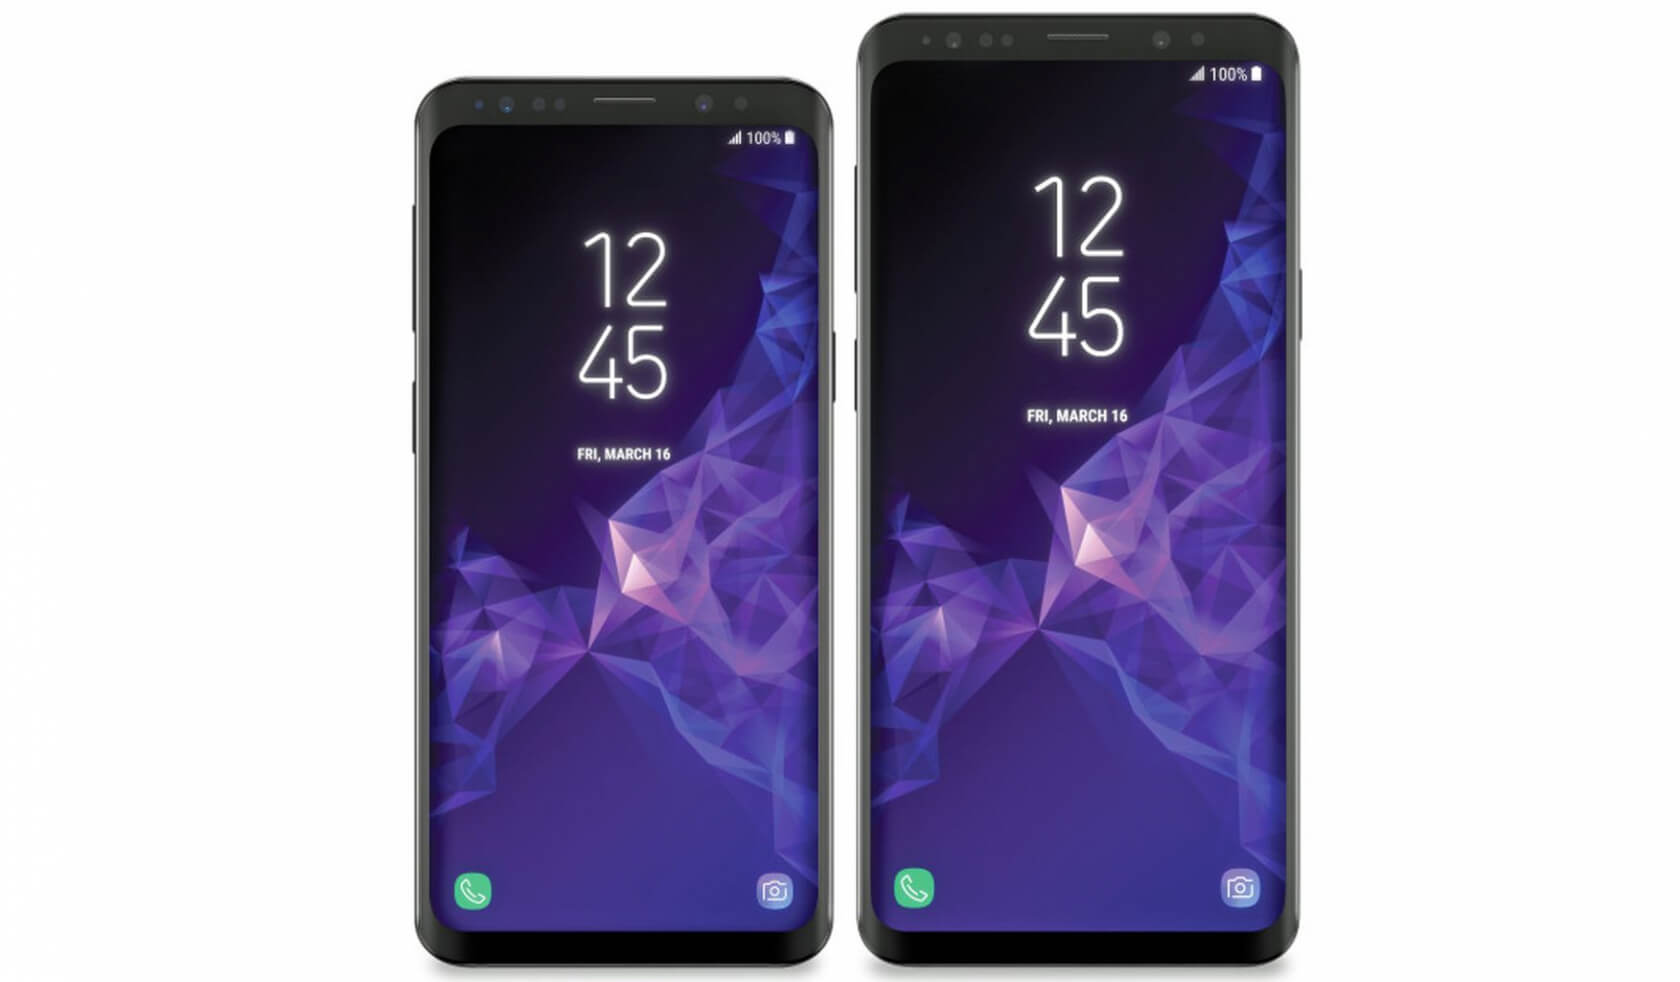 Galaxy S9 rumored to cost around $100 more than the S8